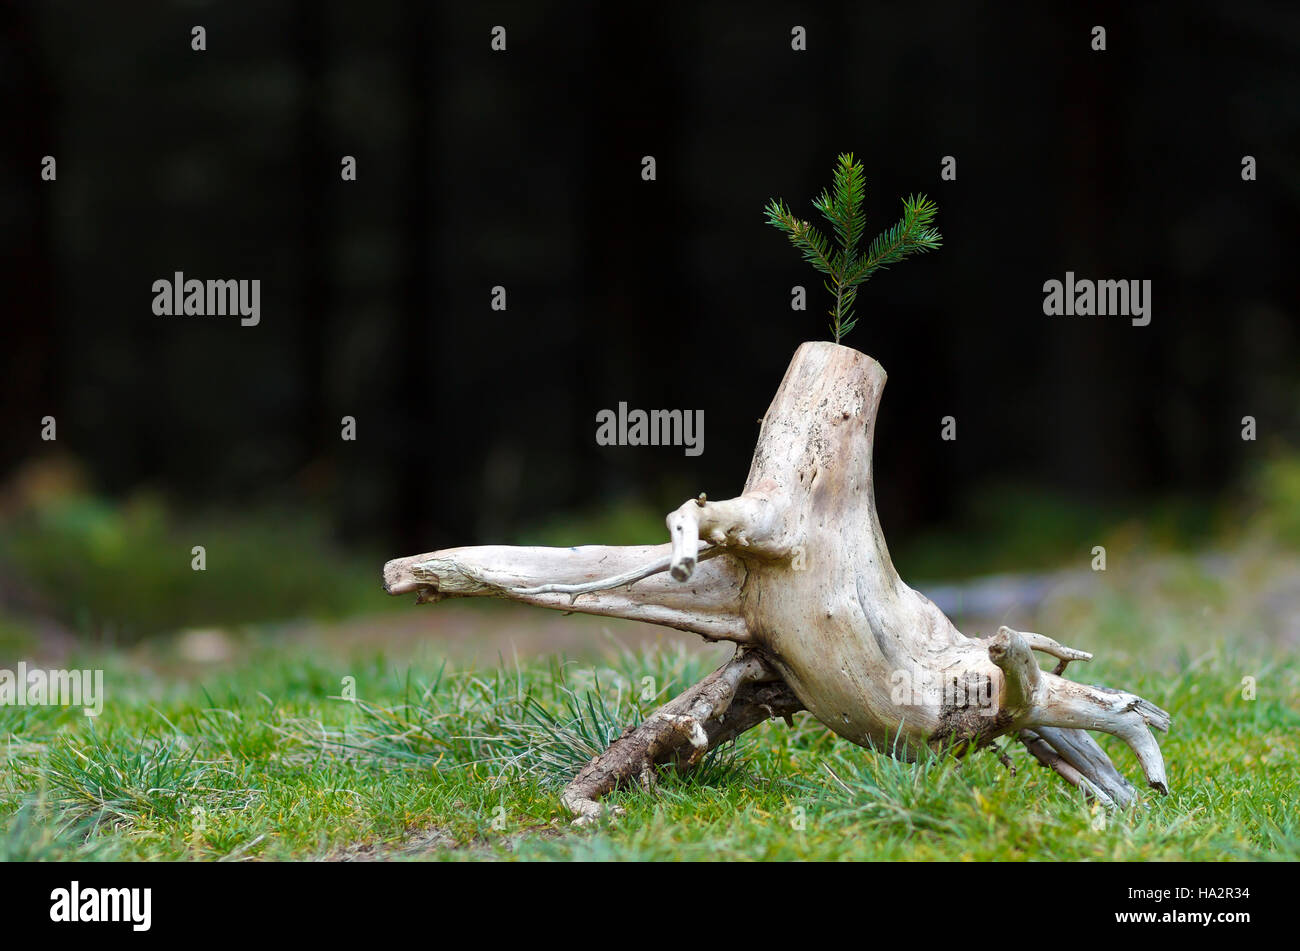 Photo of the abstract stub in the nature with blurred dark background. Old tree stump. Dry dead snag with a pine tree branch on it. The beginning of n Stock Photo